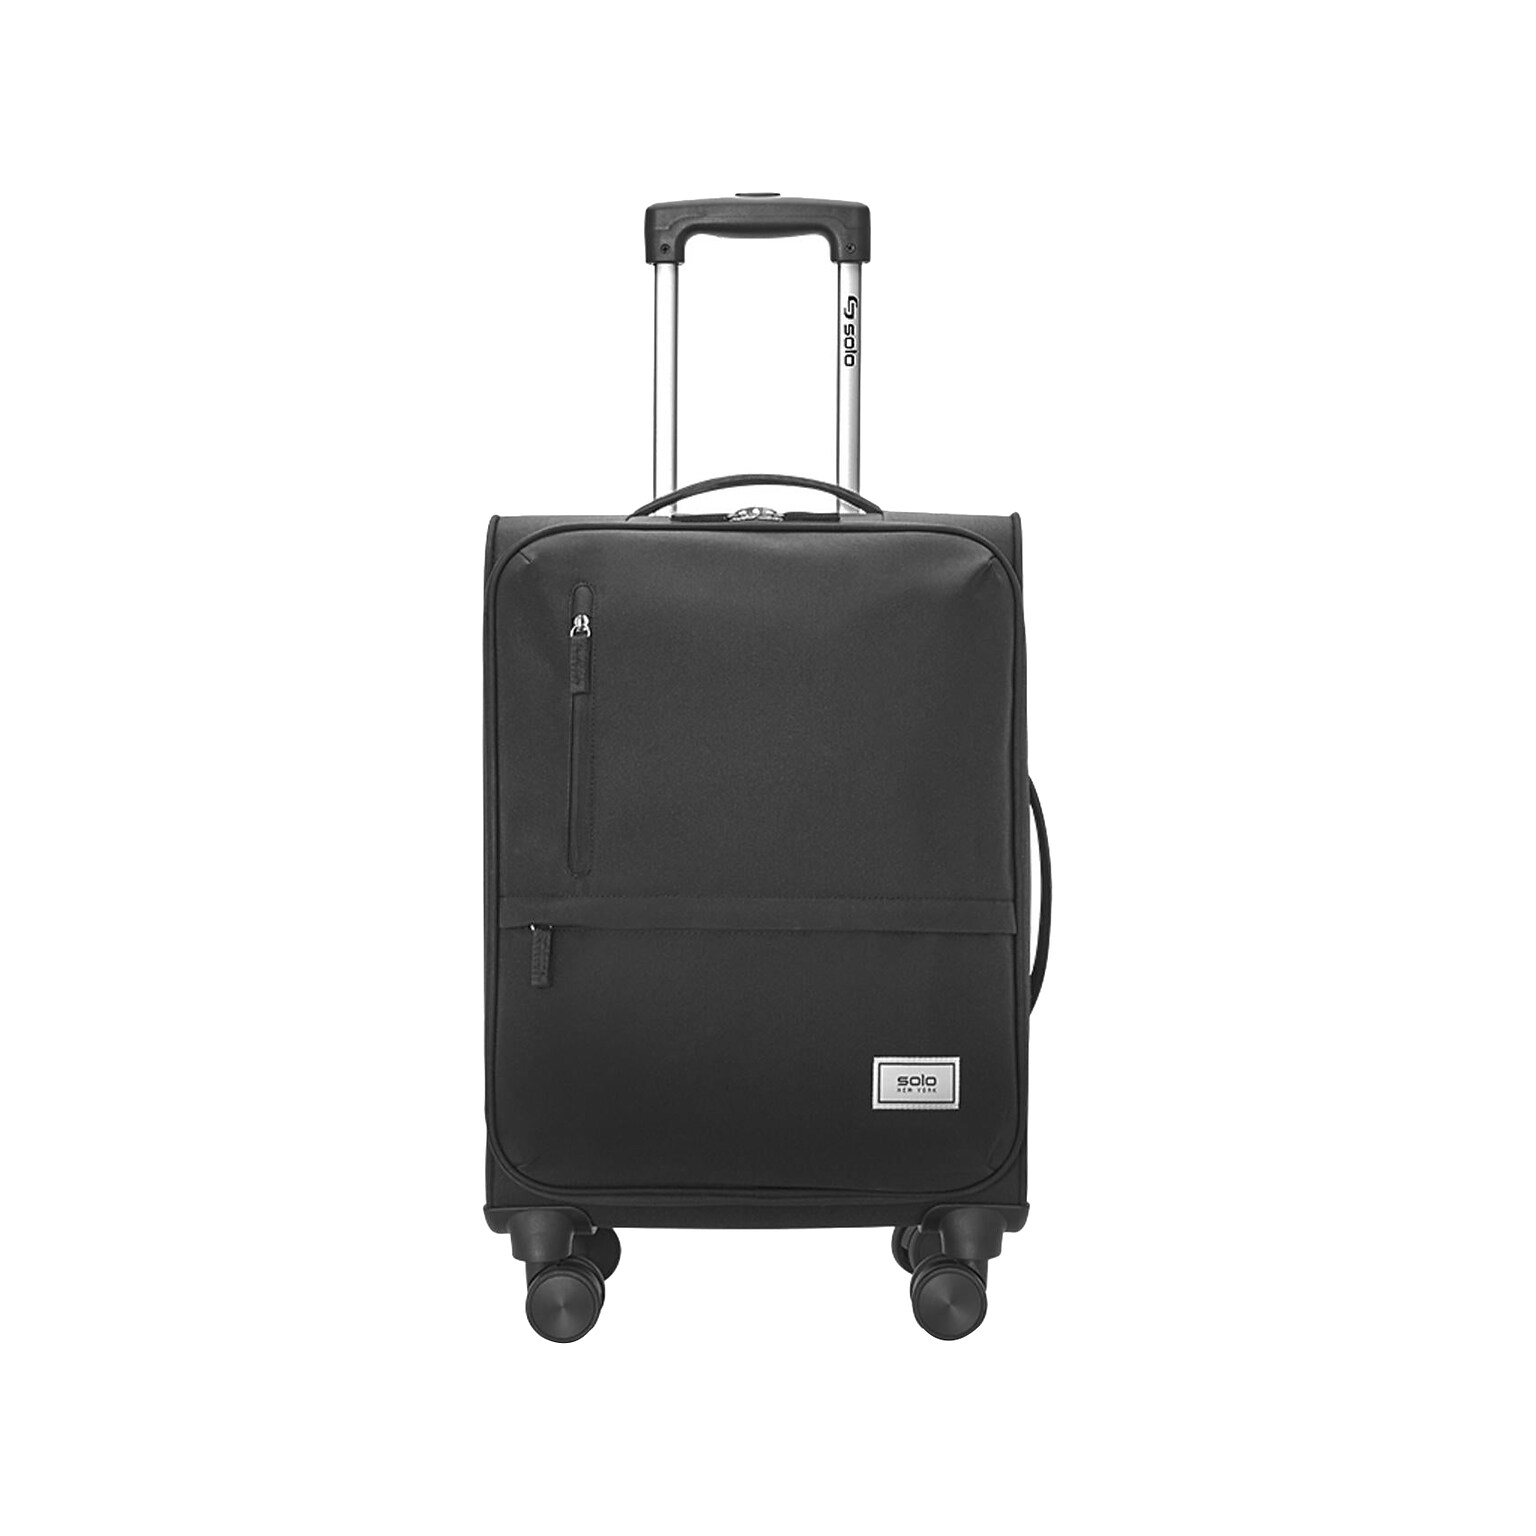 Solo New York Re:treat 22 Carry-On Suitcase, 4-Wheeled Spinner, TSA Checkpoint Friendly, Black (UBN930-4)